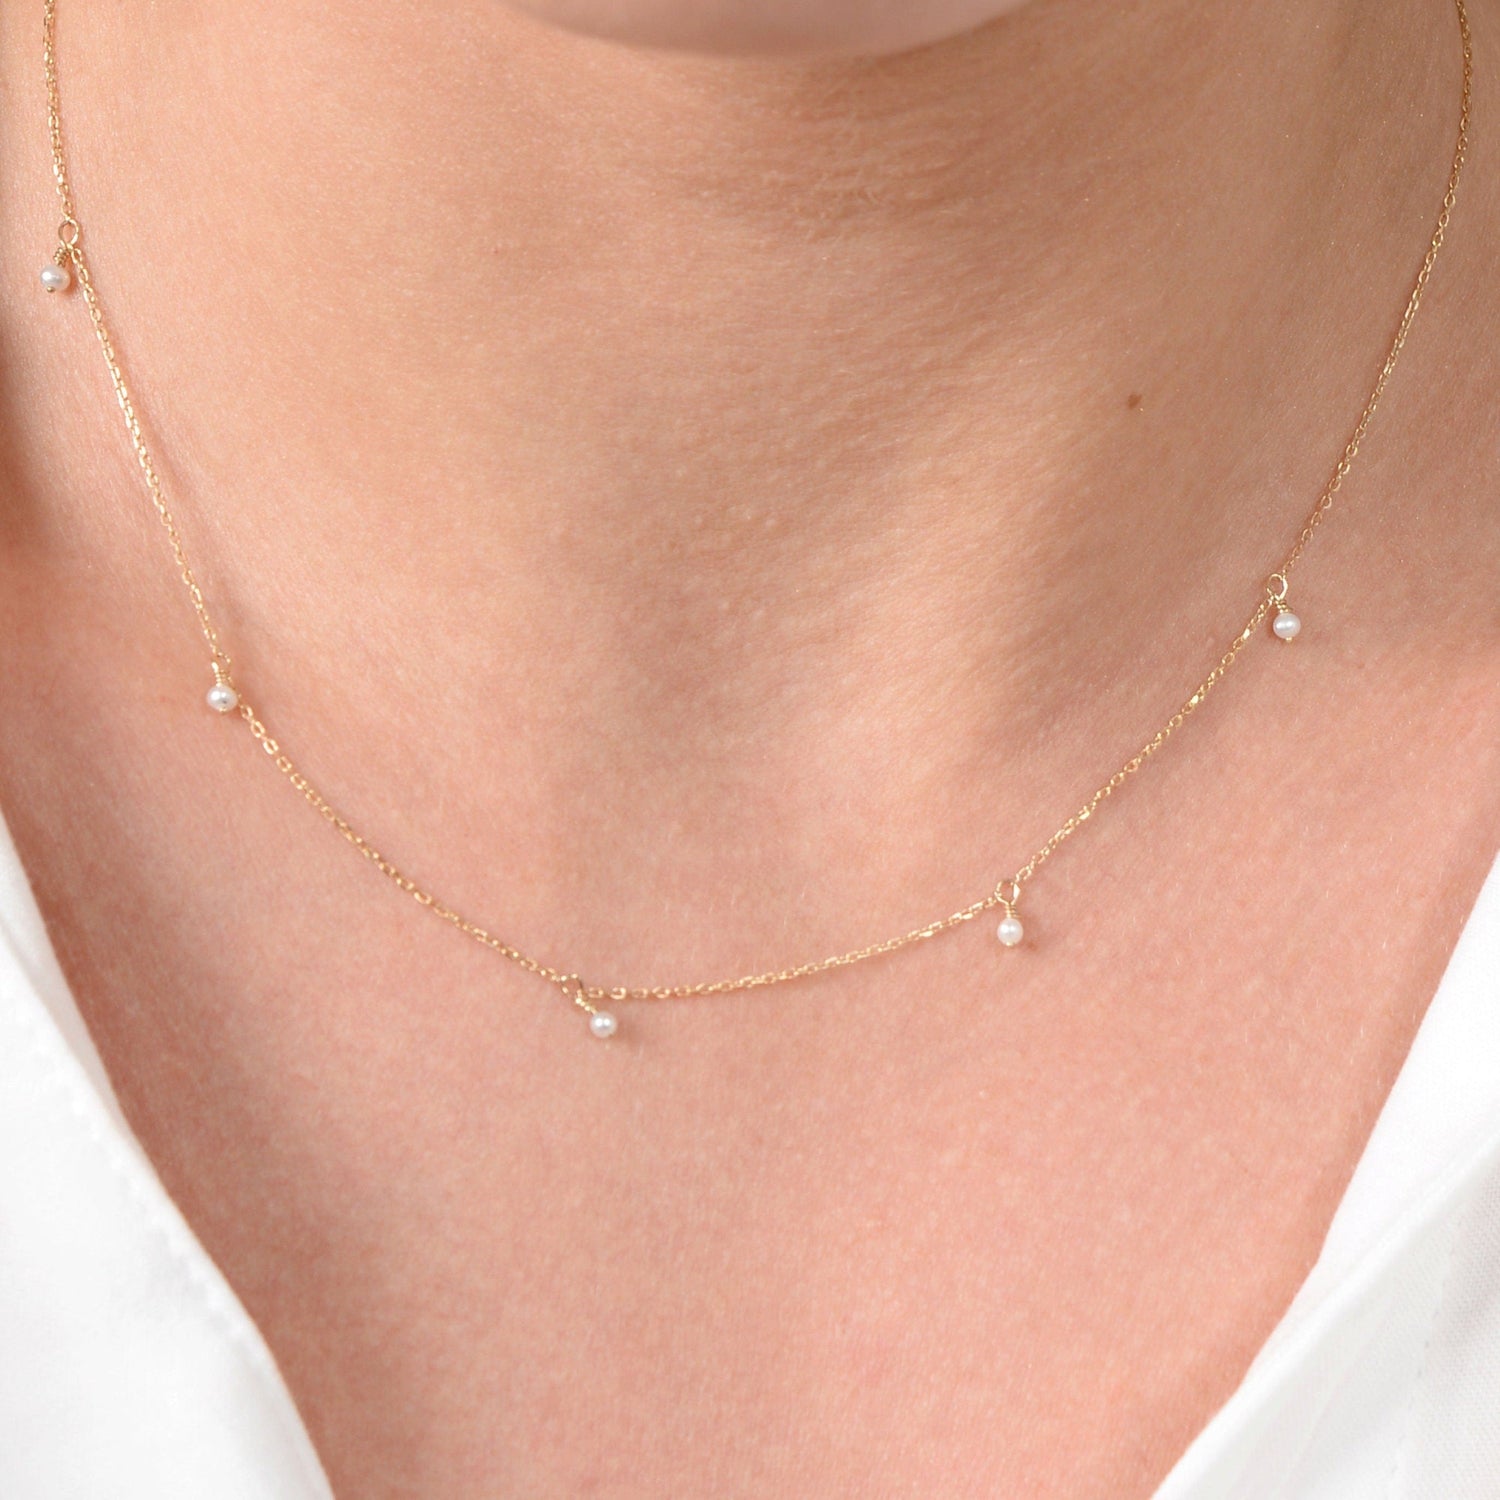 Tiny Hanging Pearls Necklace / Dainty Pearl Solid Gold Necklace / Minimalist 14k Solid Gold Necklace / Unique Christmas Sale for her